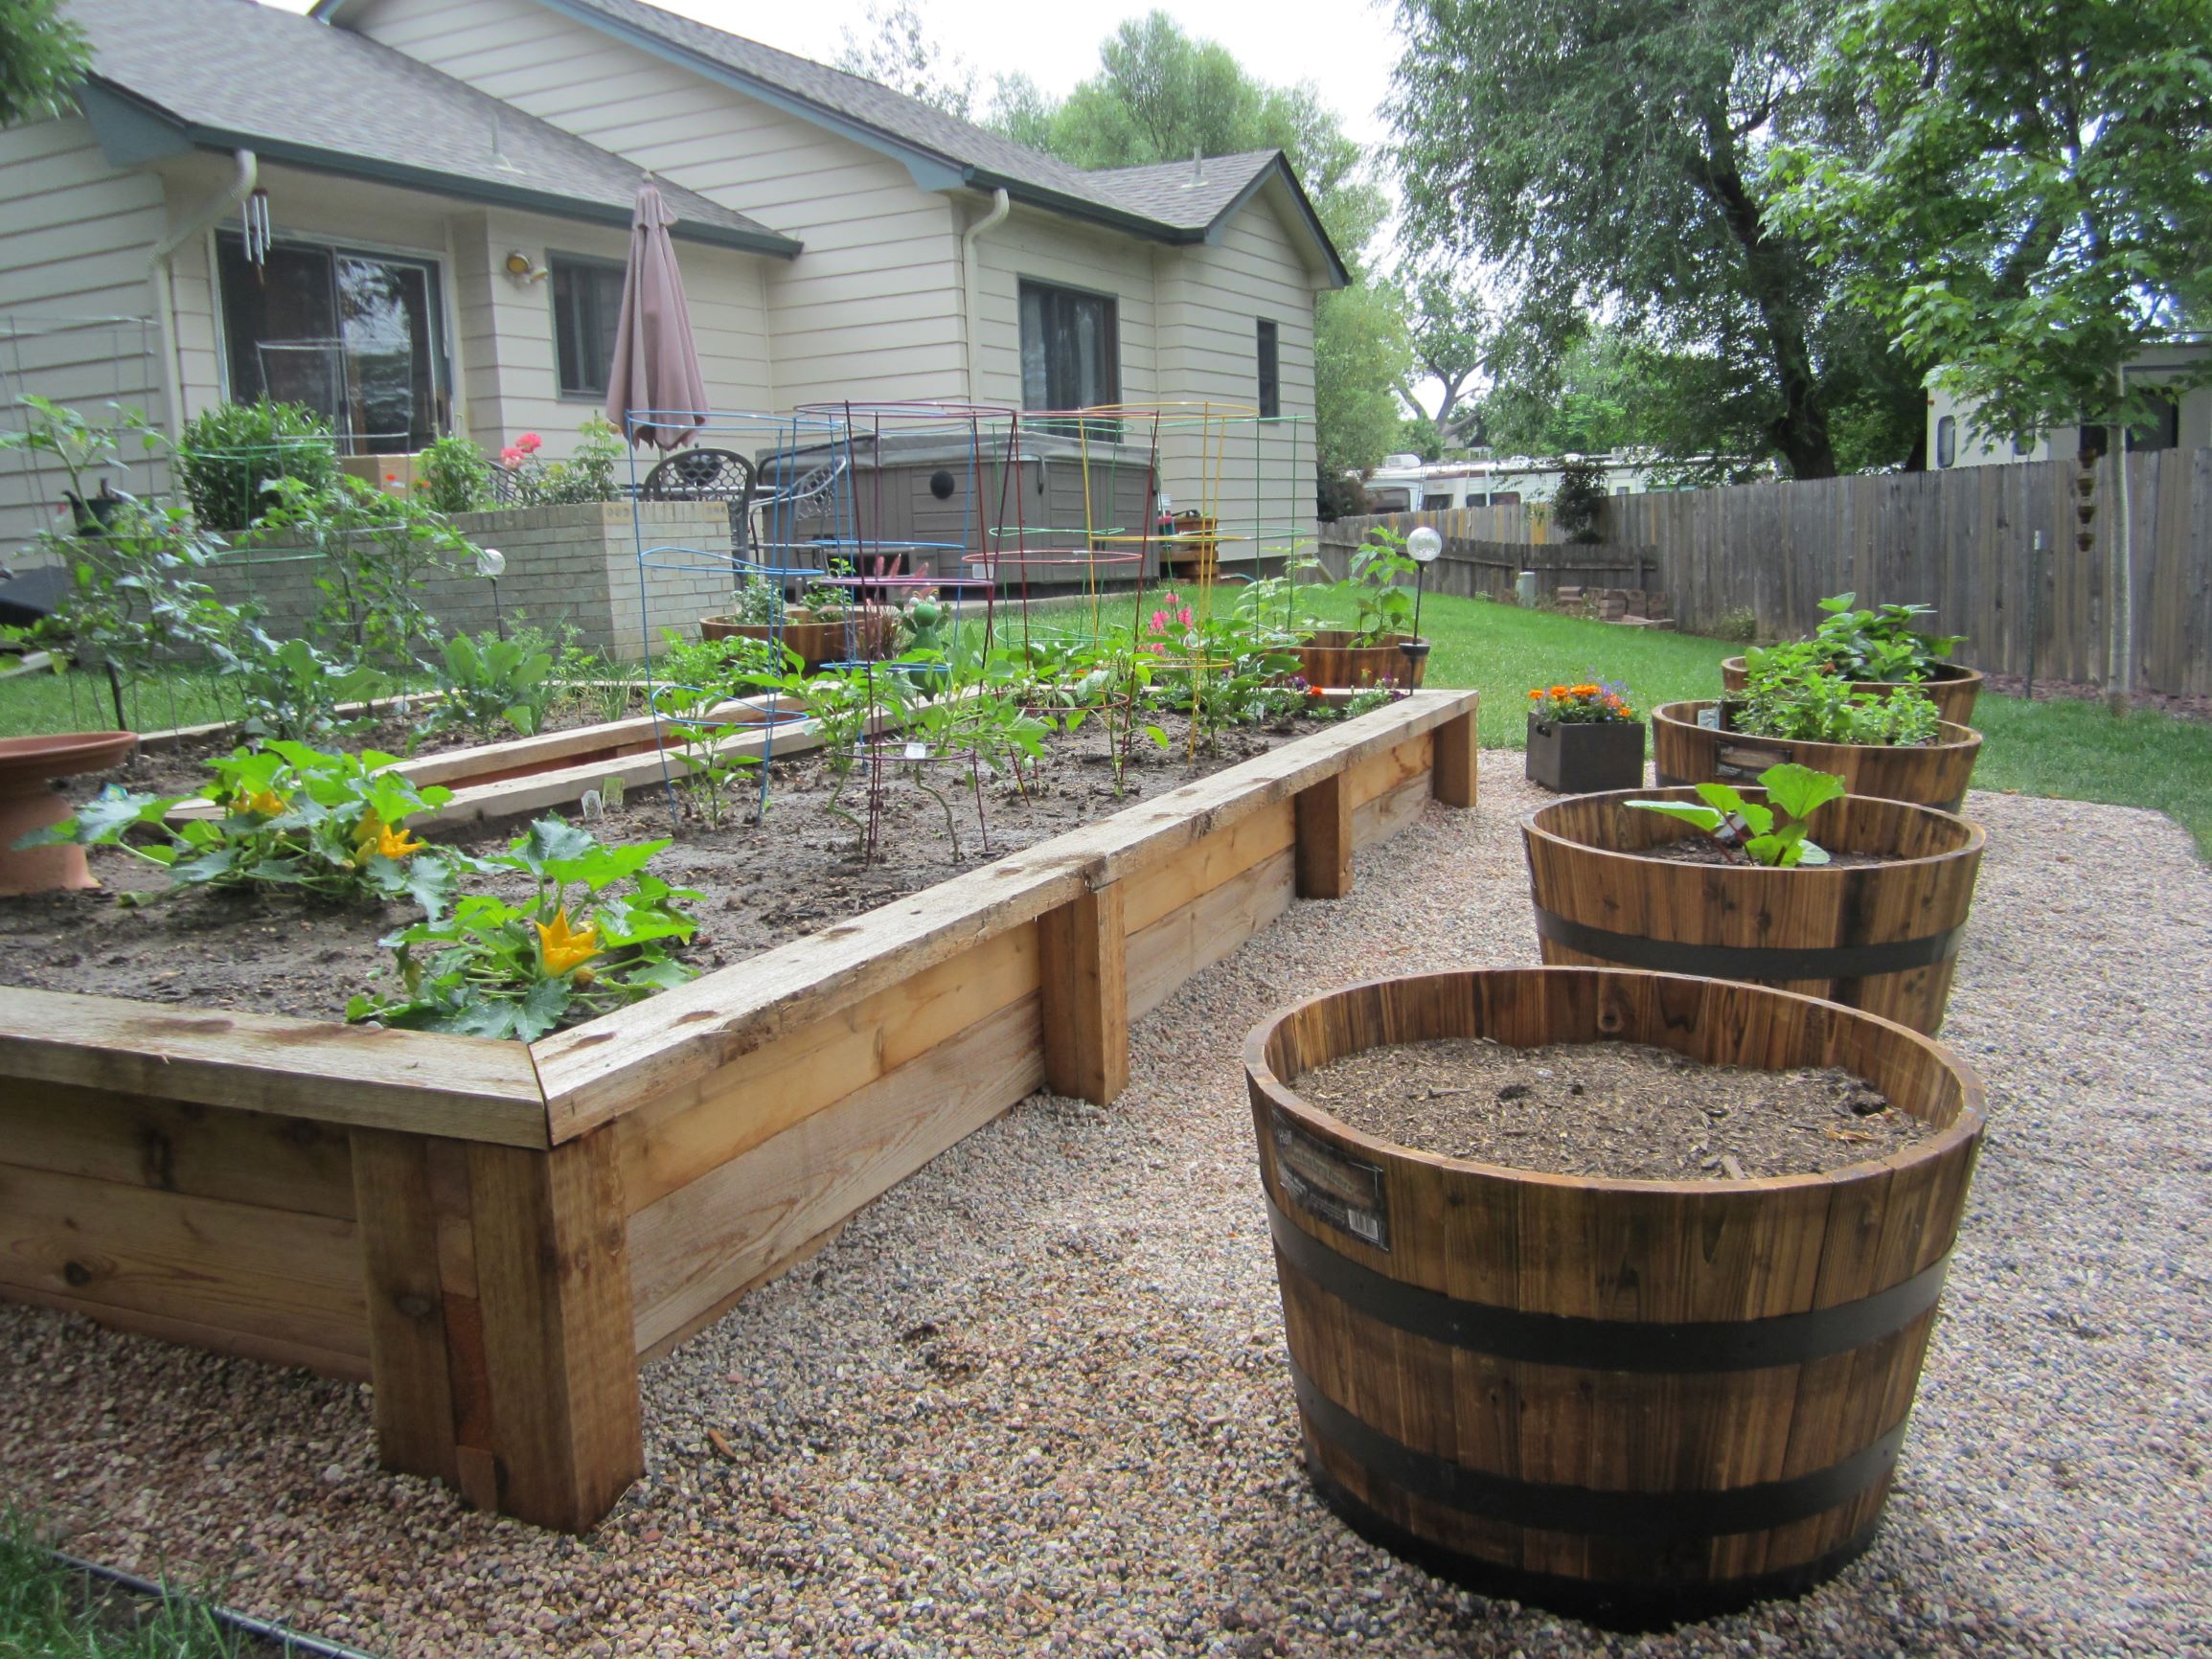 Raised beds on top of pea gravel.